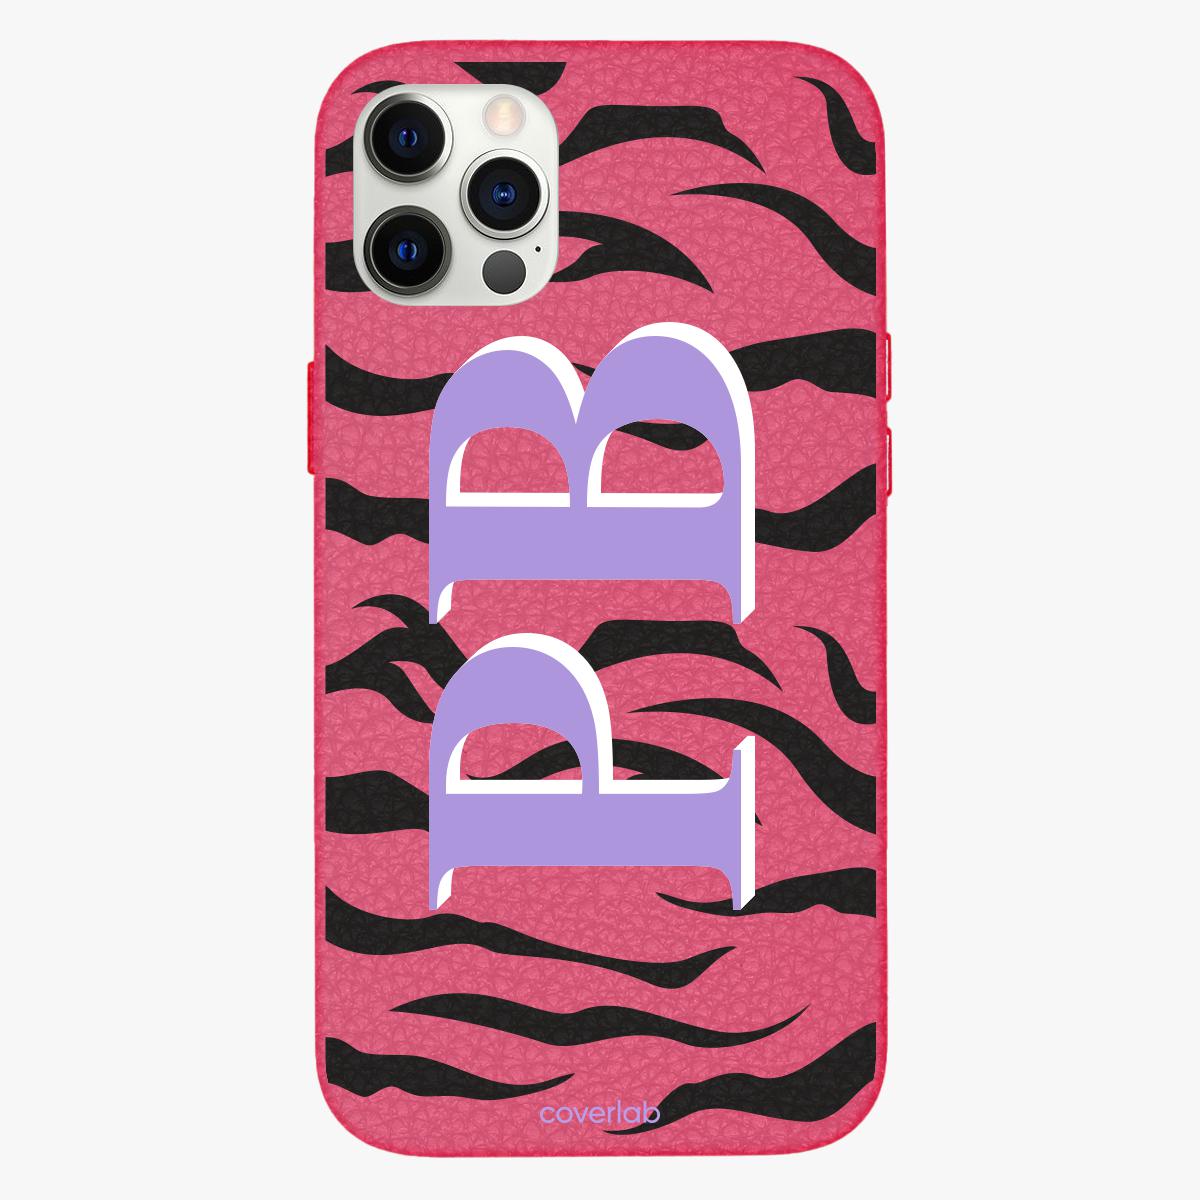 Tiger Personalised Leather iPhone Case